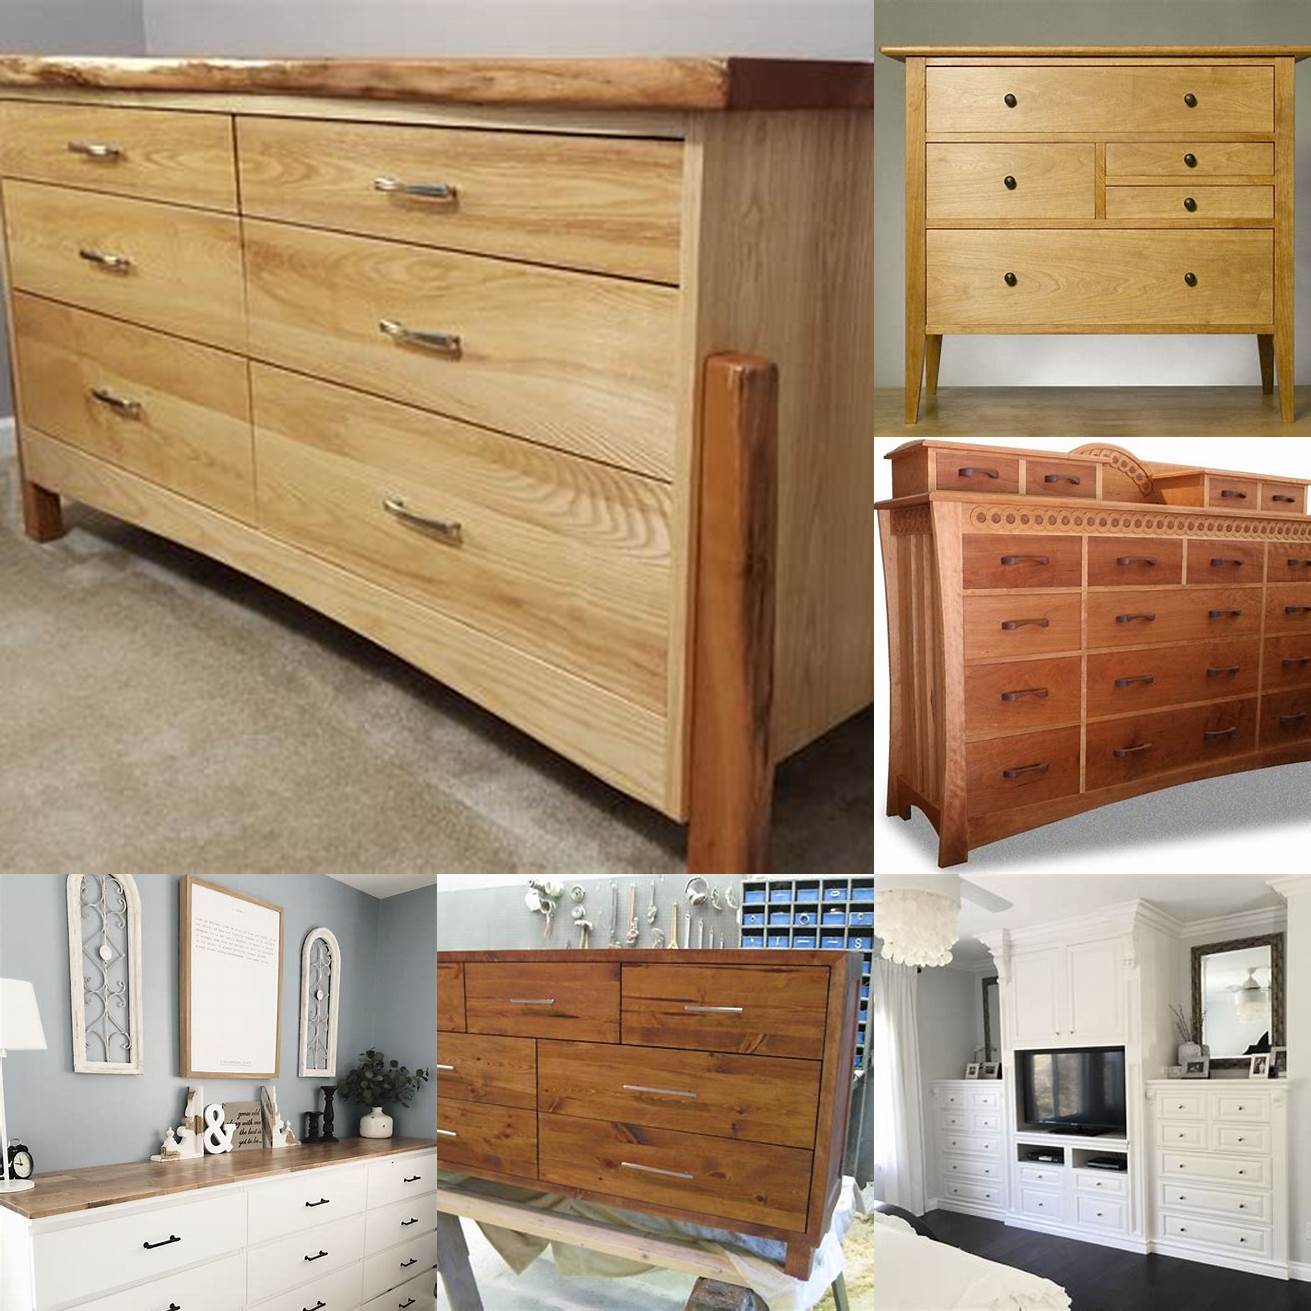 A custom dresser can be designed to fit your storage needs and your personal style